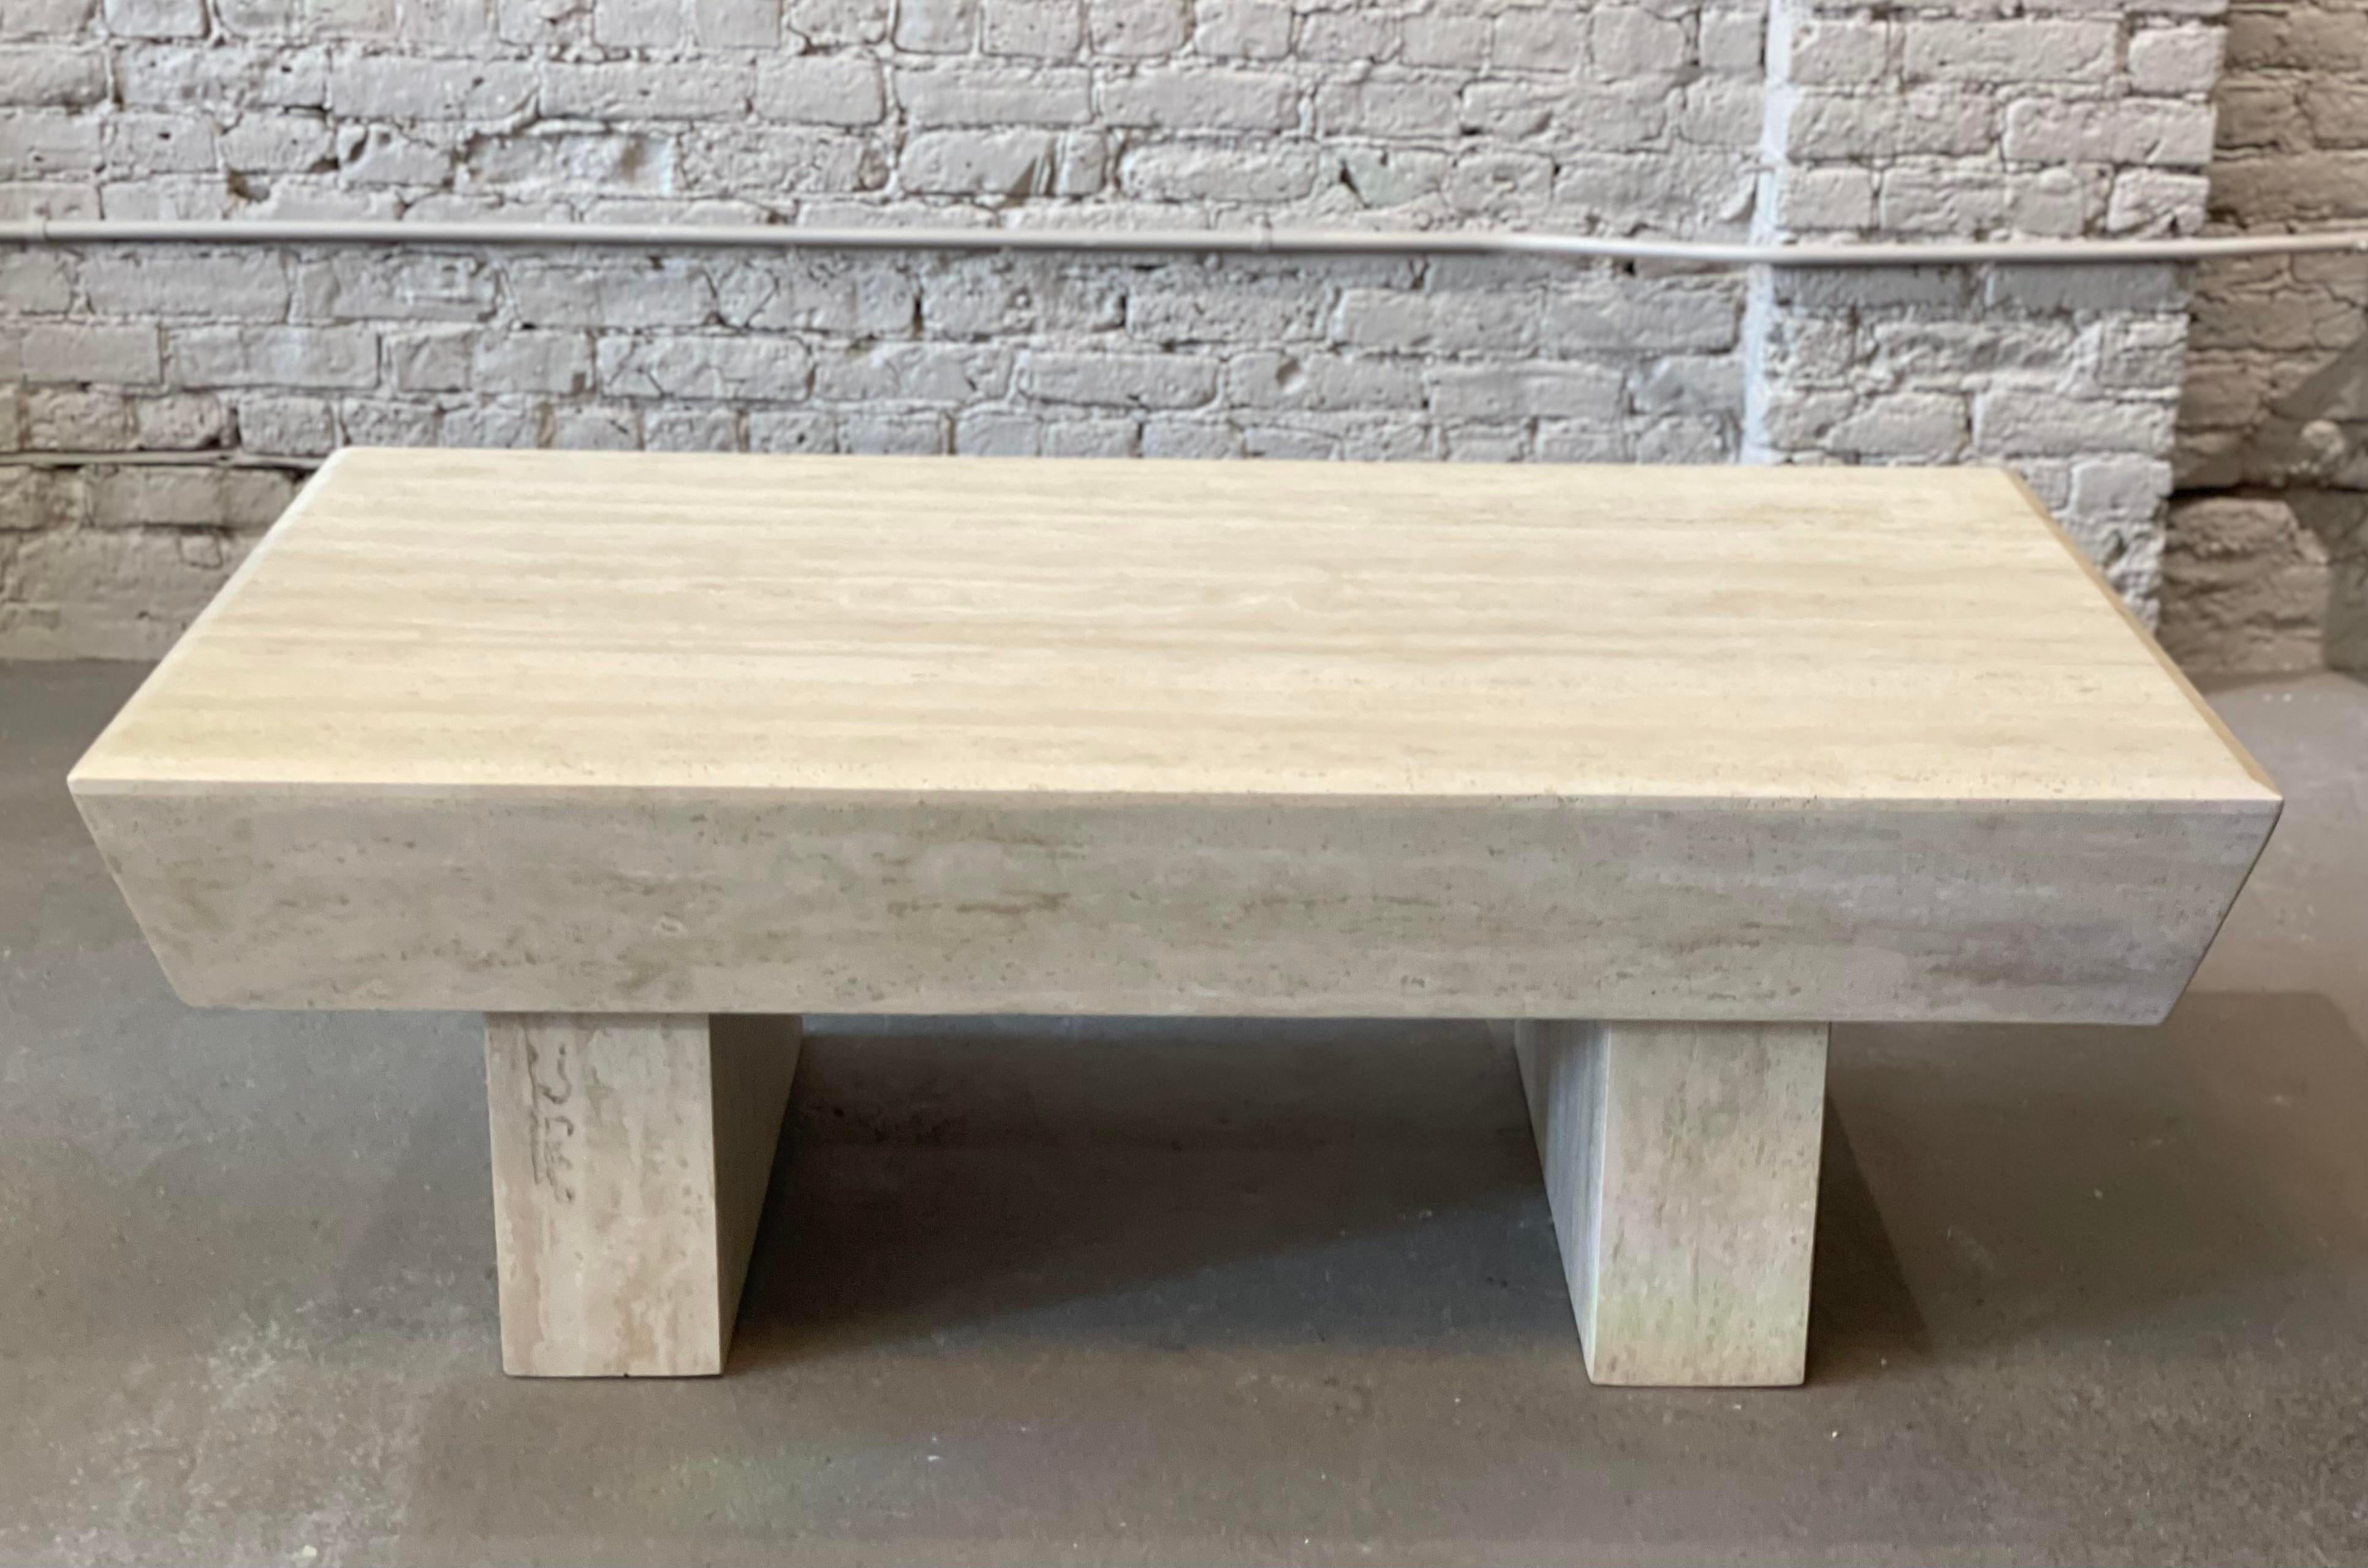 1980s Travertine Postmodern Vintage Coffee Table with Angled Edge For Sale 2